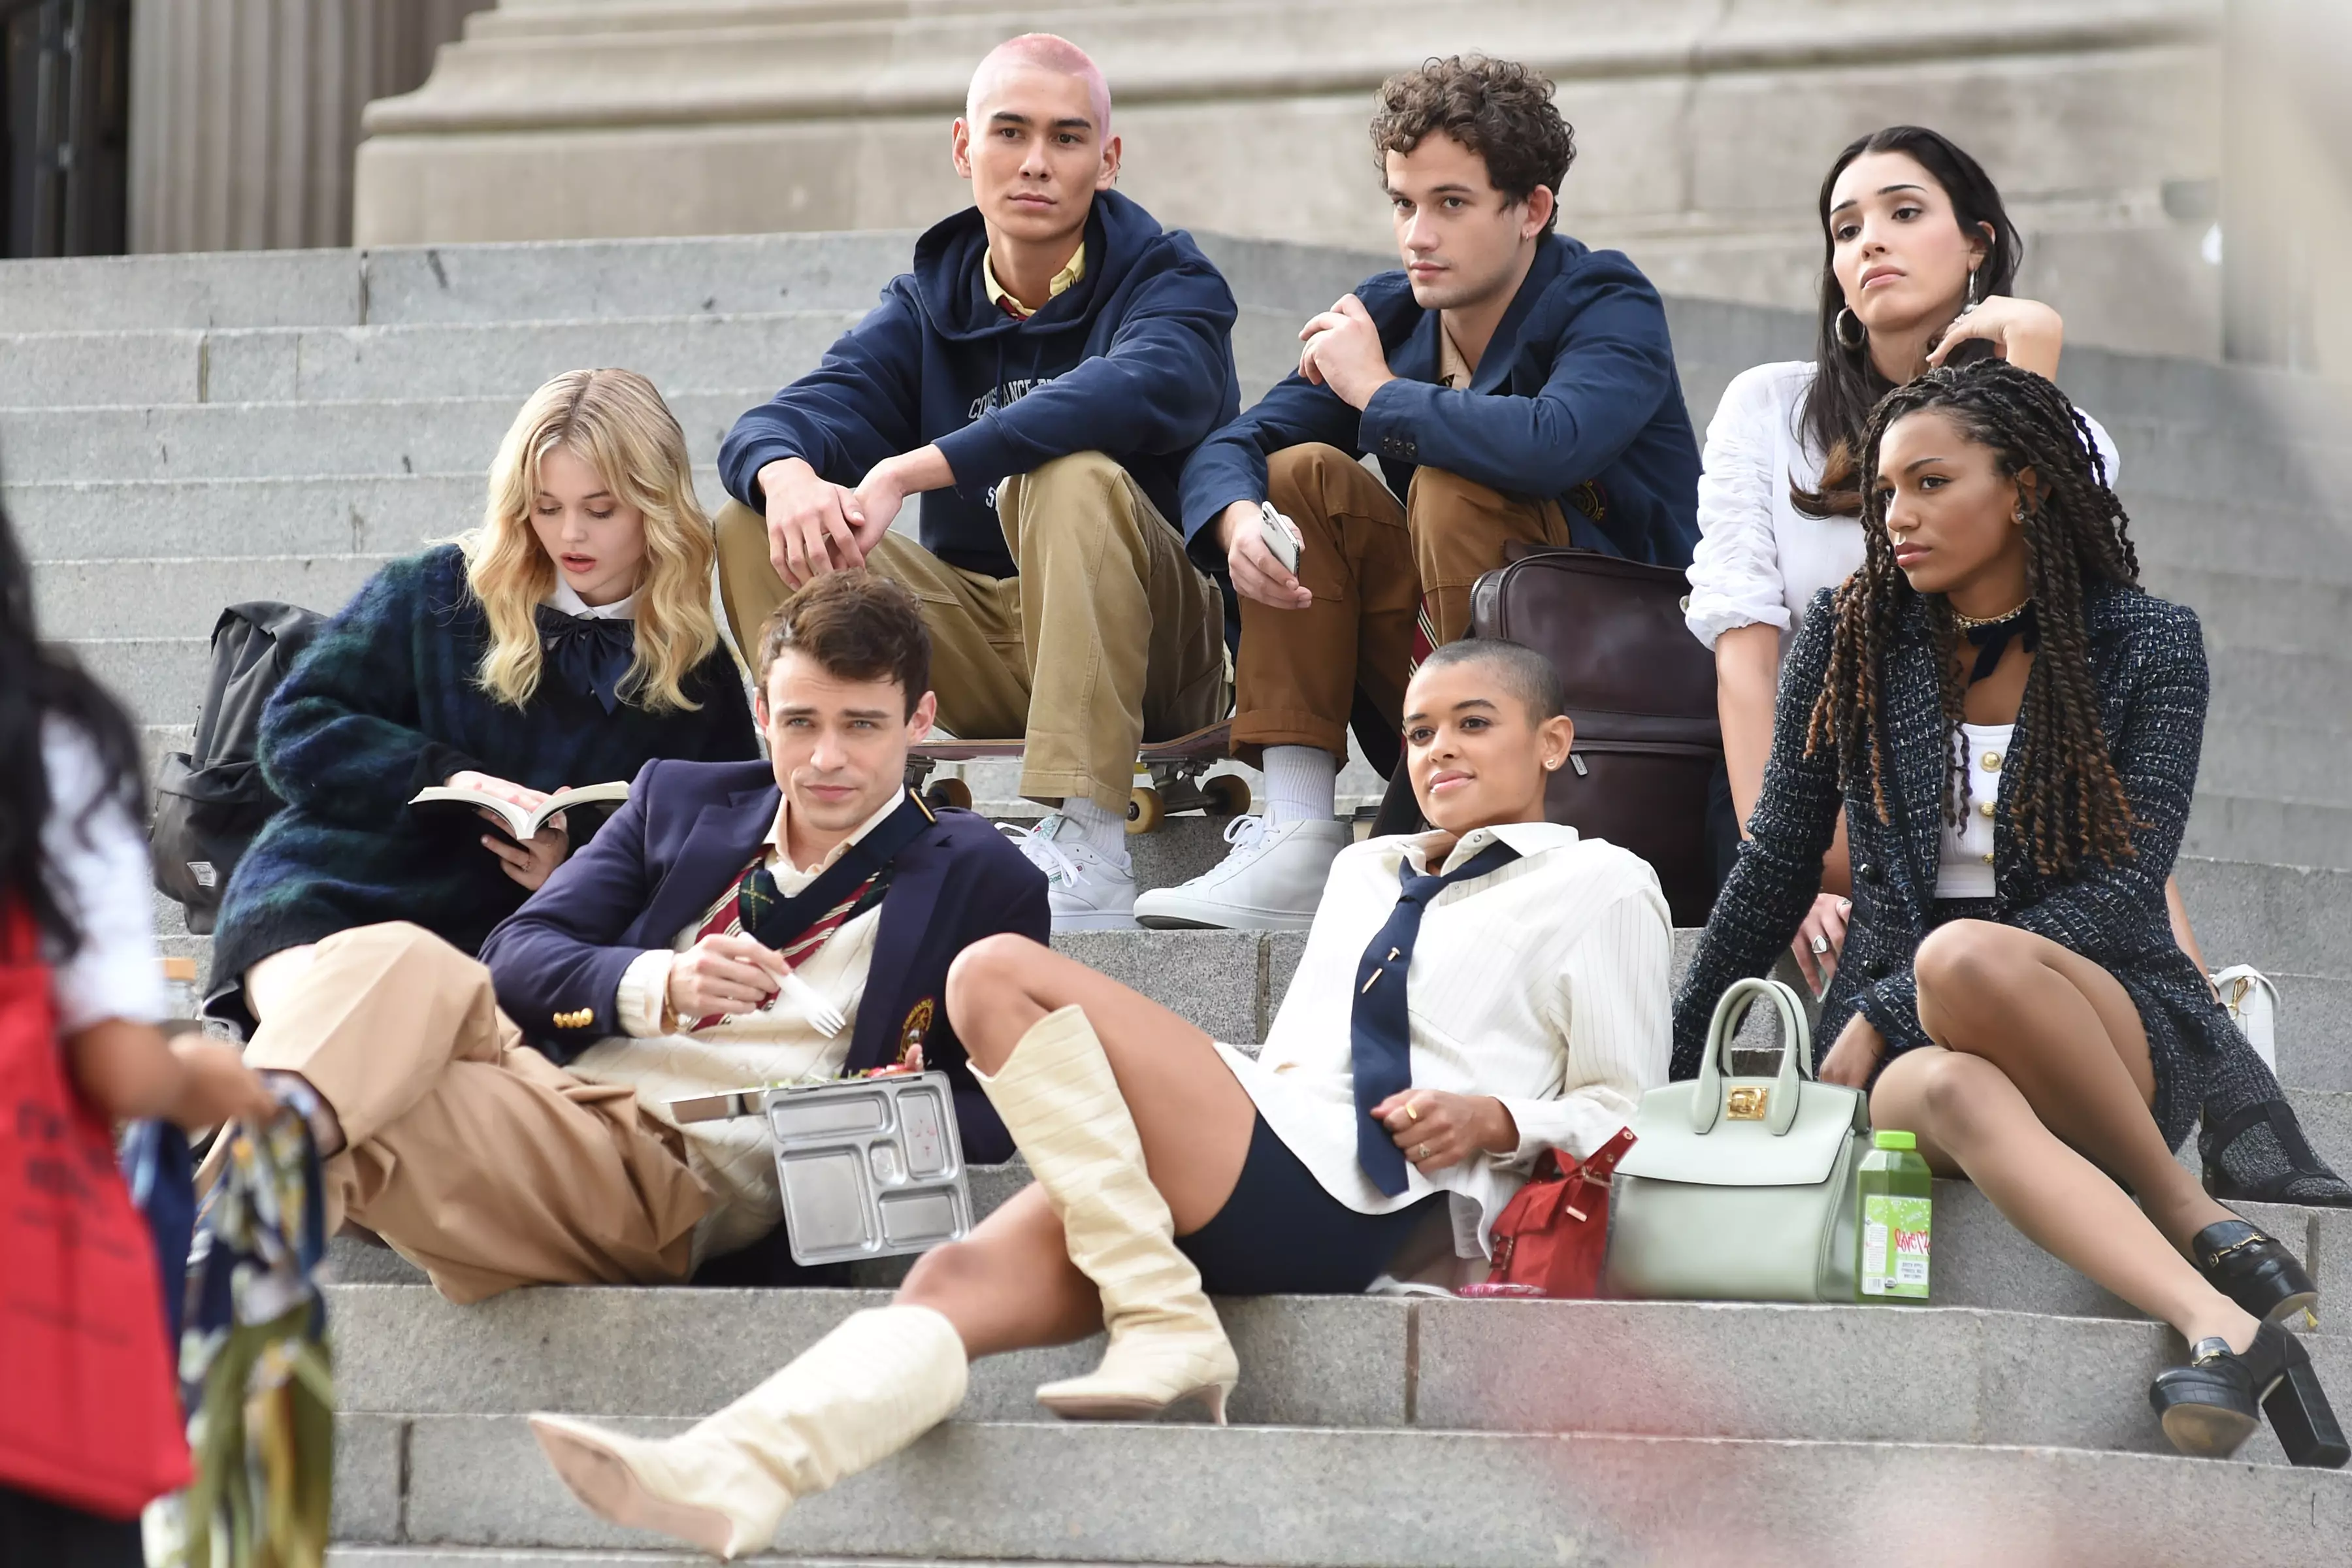 The new Gossip Girl series will premiere in 2021 on HBO Max (